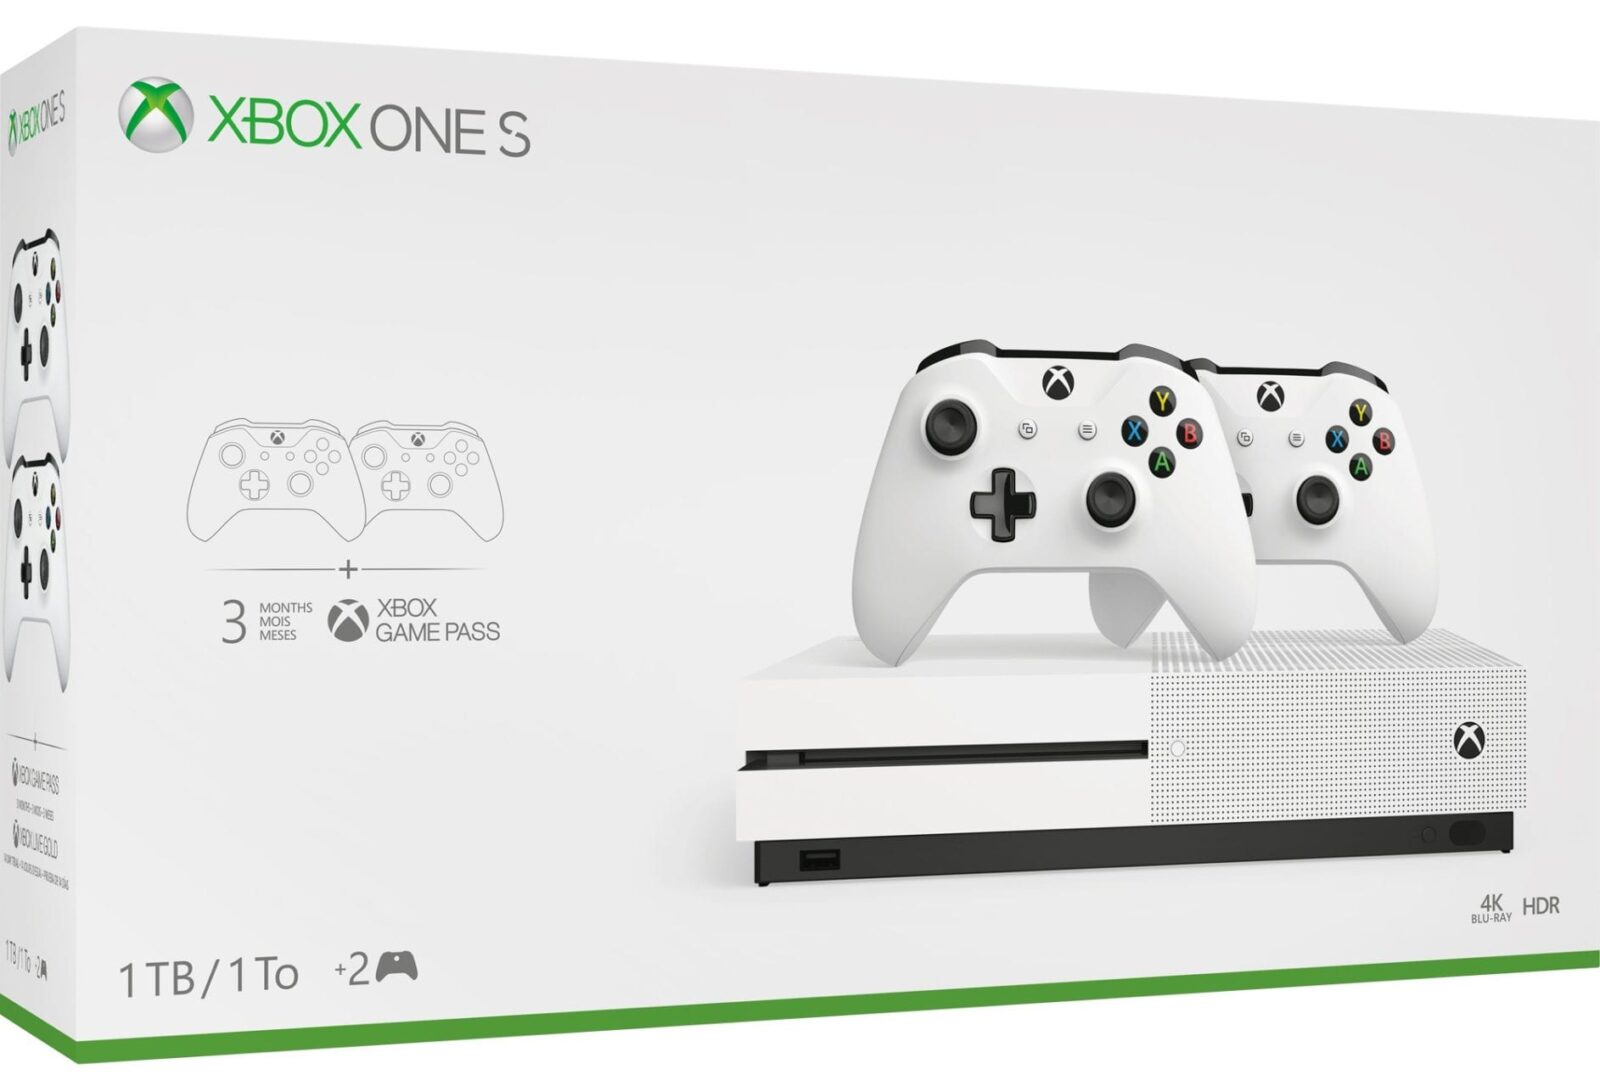 Get an Xbox One S Bundle for $200